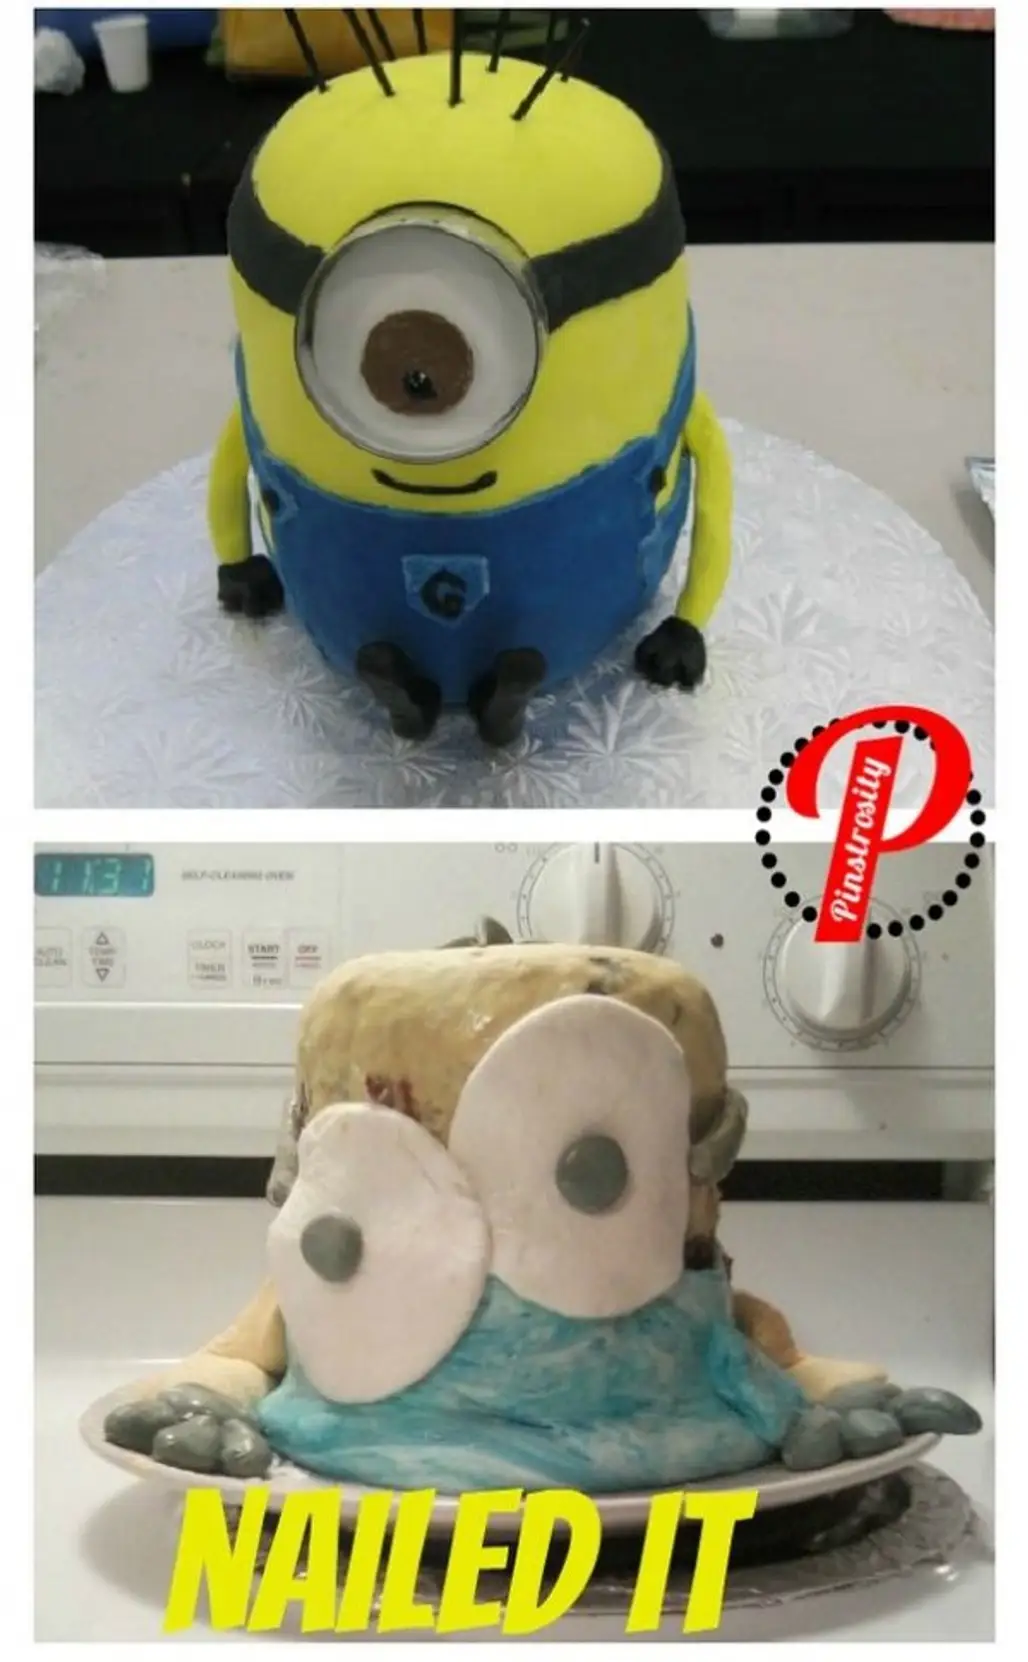 Another MInion Cake